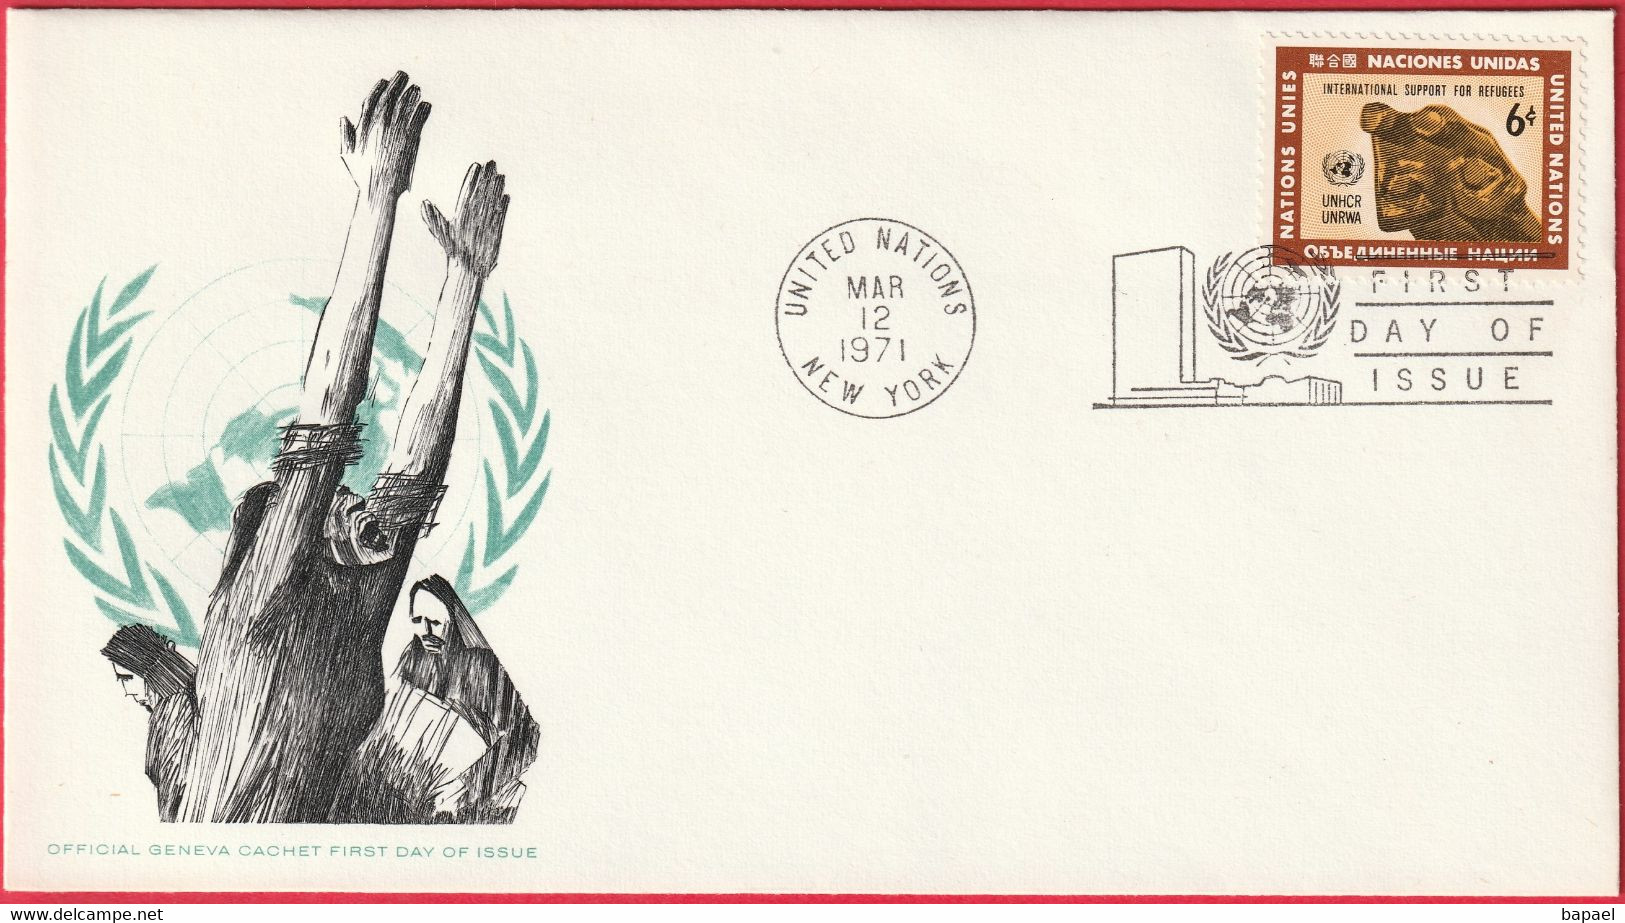 FDC - Enveloppe - Nations Unies - (New-York) (12-3-71) - International Support For Refugees (2) (Recto-Verso) - Covers & Documents